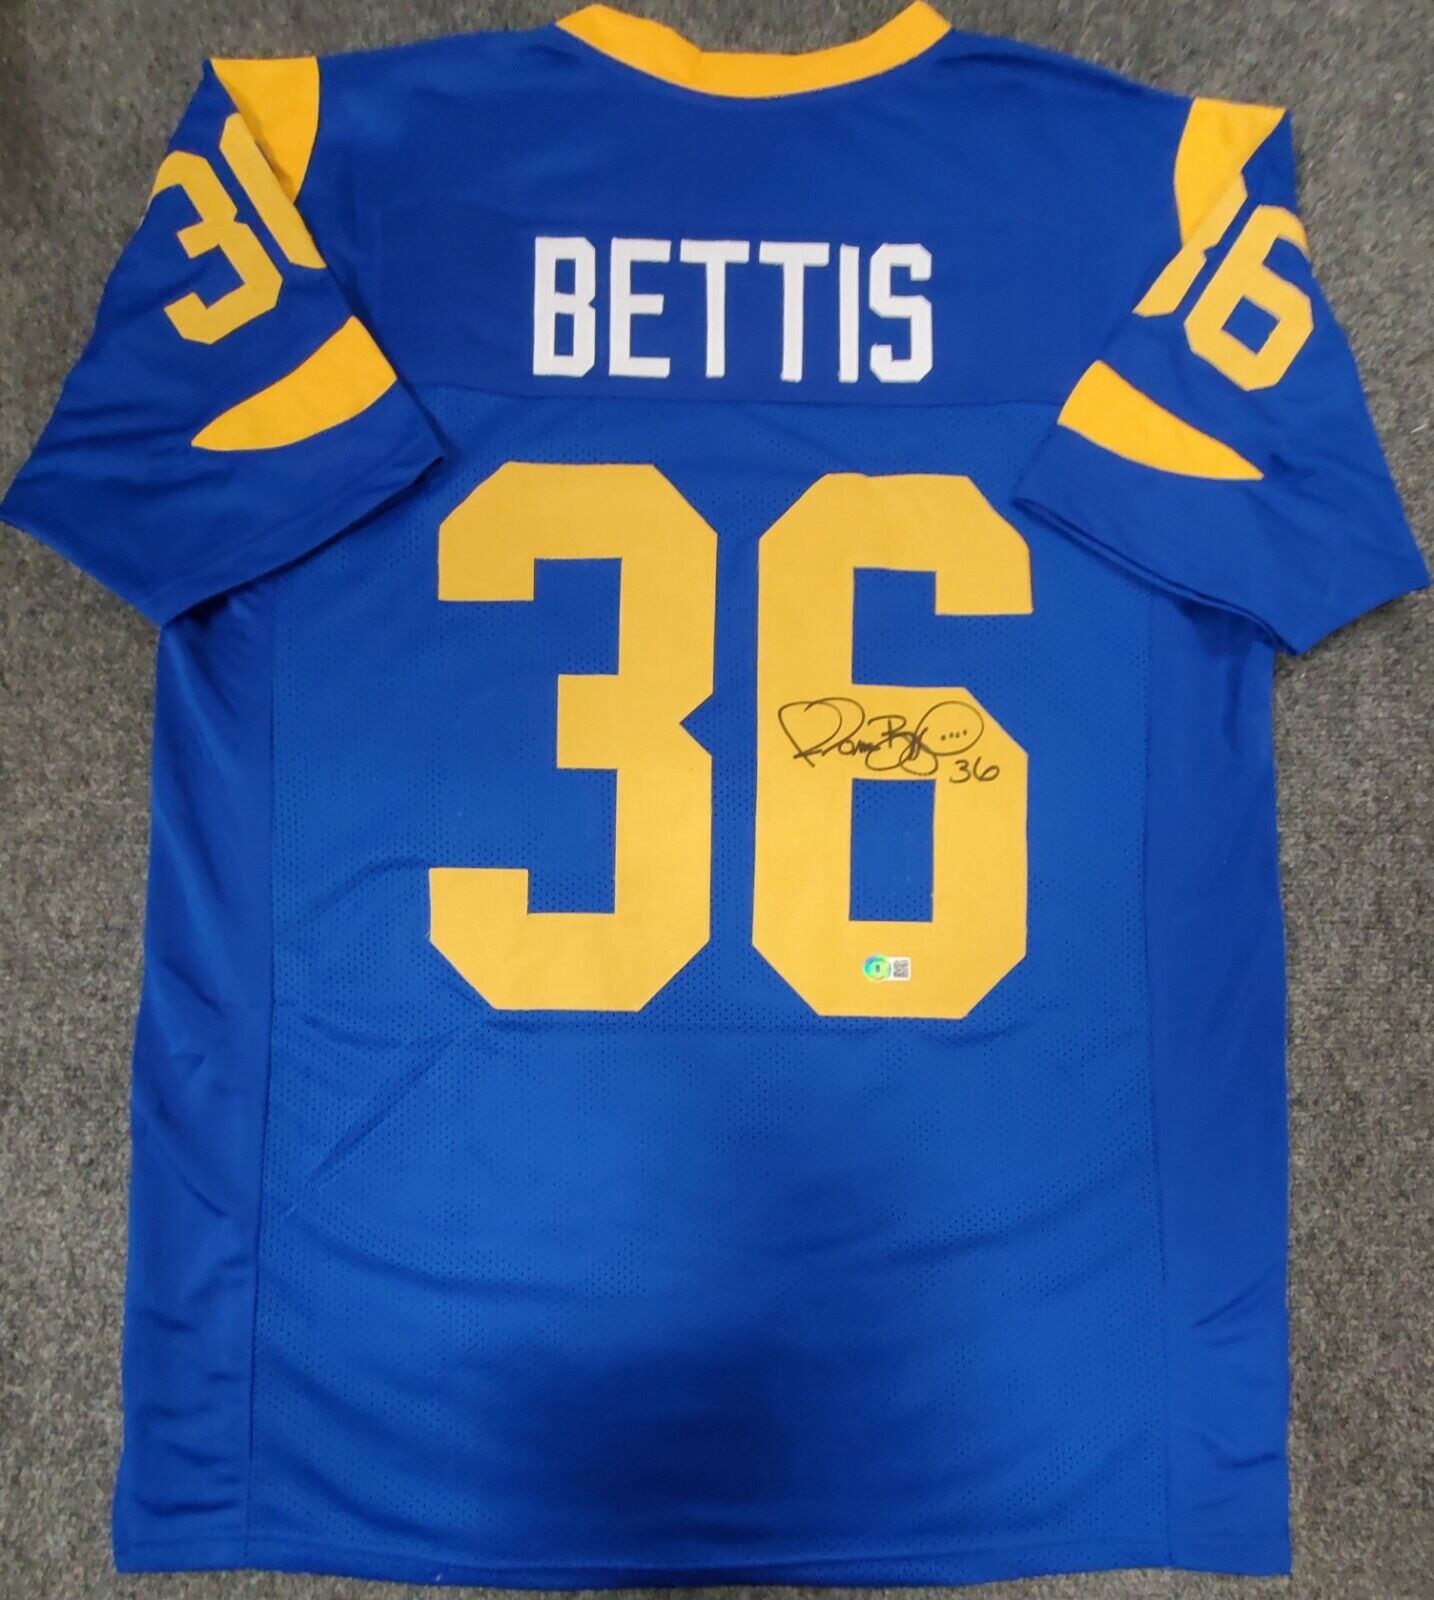 MVP Authentics La Rams Jerome Bettis Autographed Signed Jersey Beckett Holo 179.10 sports jersey framing , jersey framing